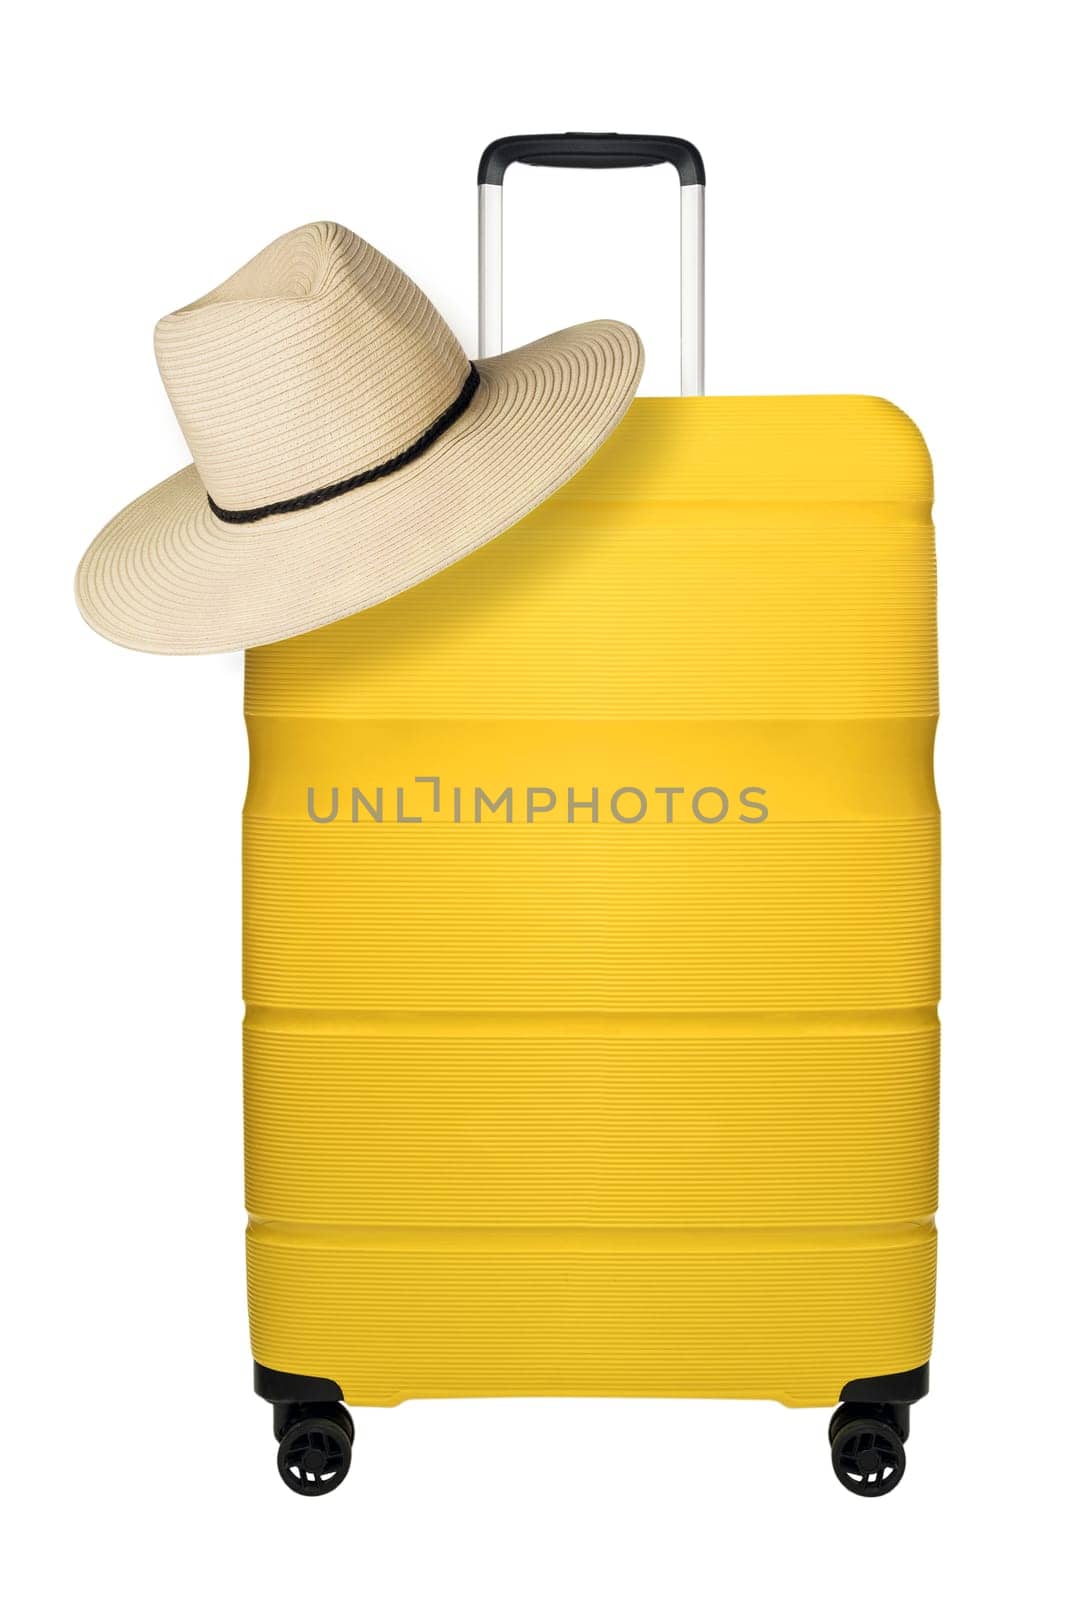 Travel yellow suitcase with straw hat isolated on white background by dmitryz